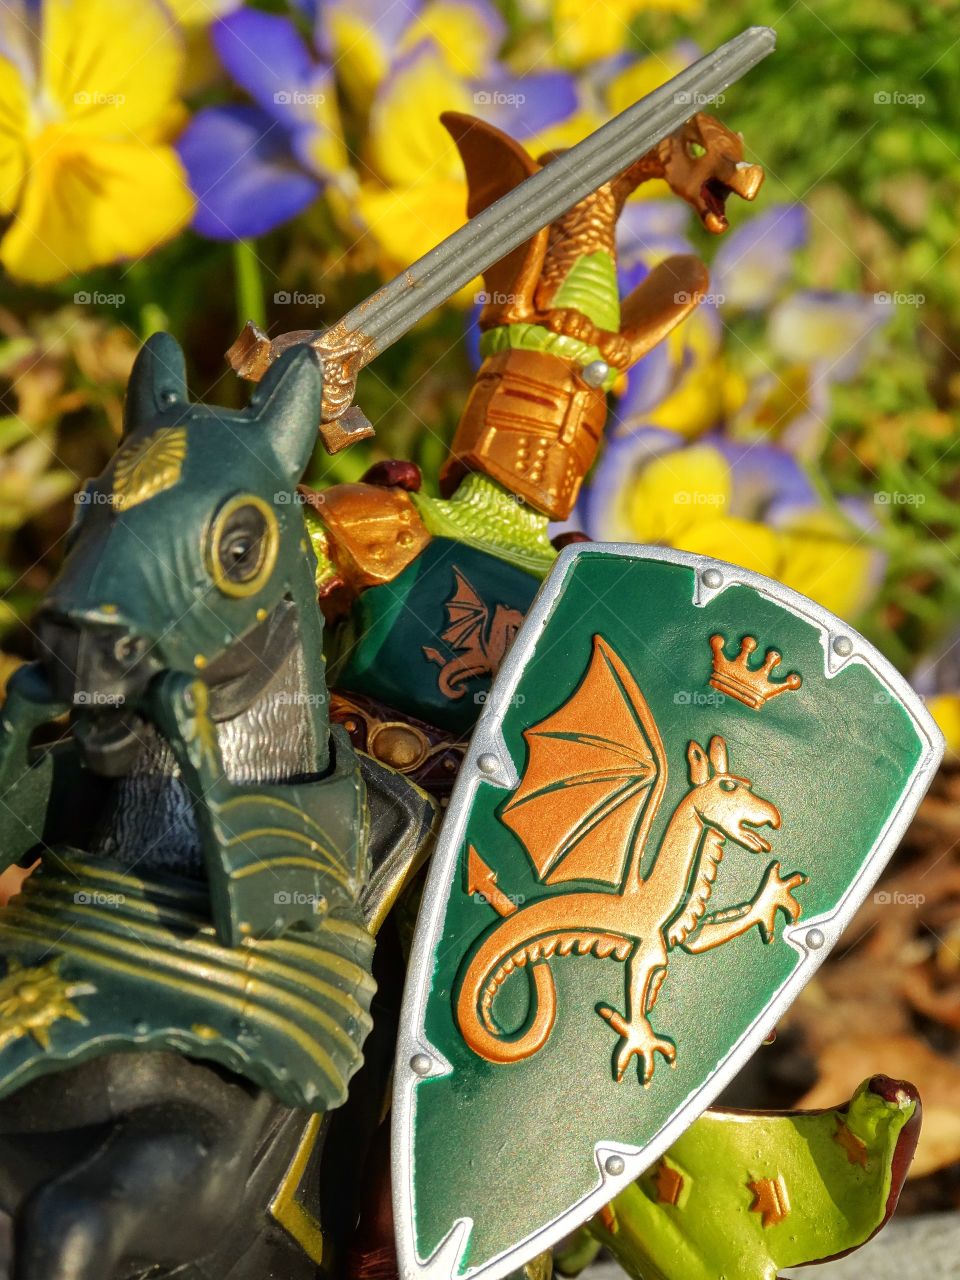 Chivalrous Knight. Childhood Medieval Knight Toy
